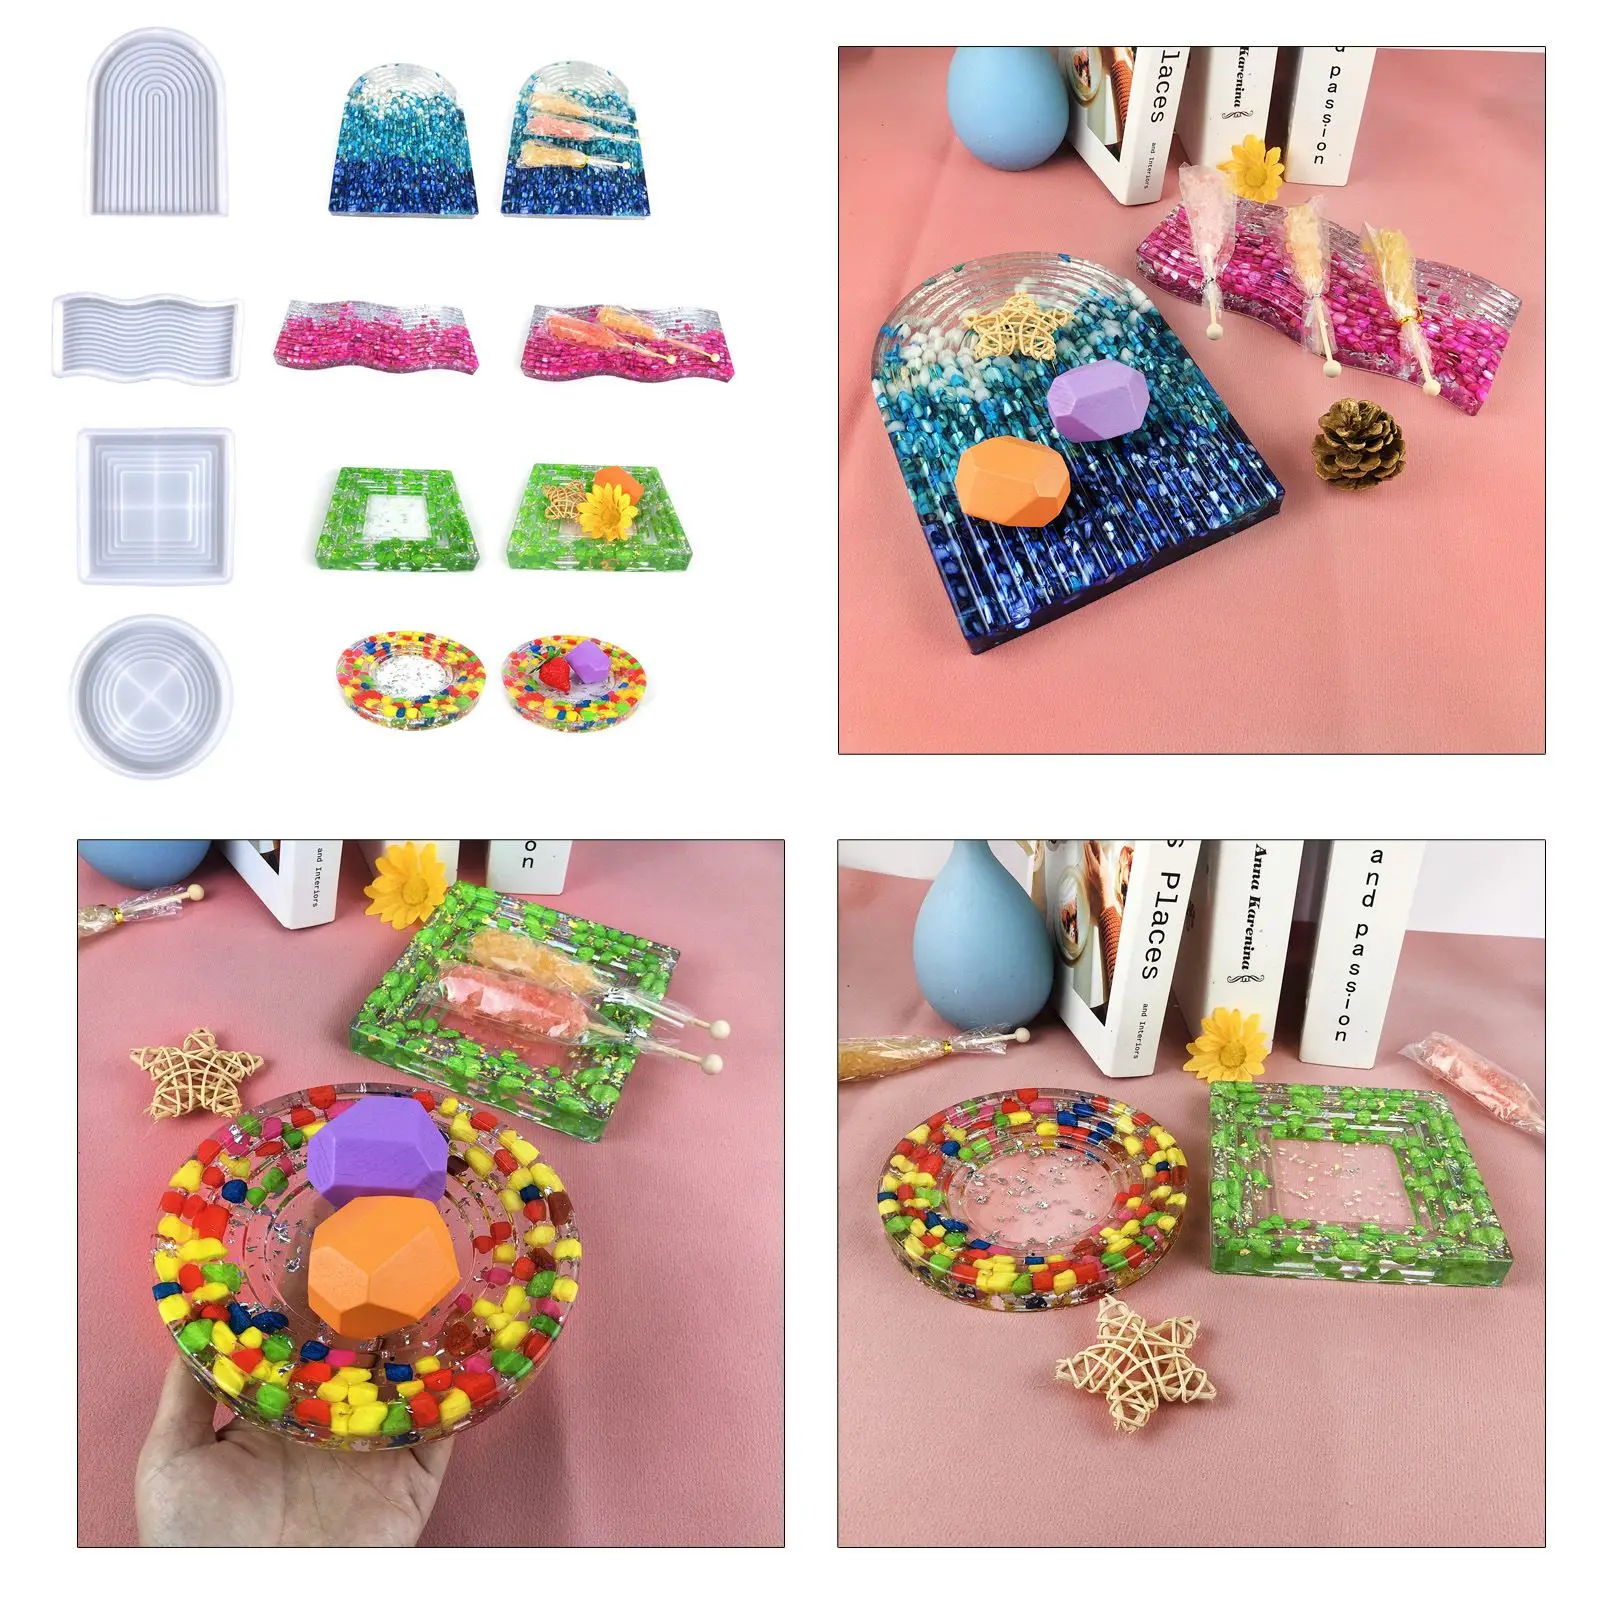 

New Epoxy Resin Tray Mold Coaster Silicone Mold Trays Tea Fruit Lace Round Ornament Table Decorative Trays Mold For Handicrafts